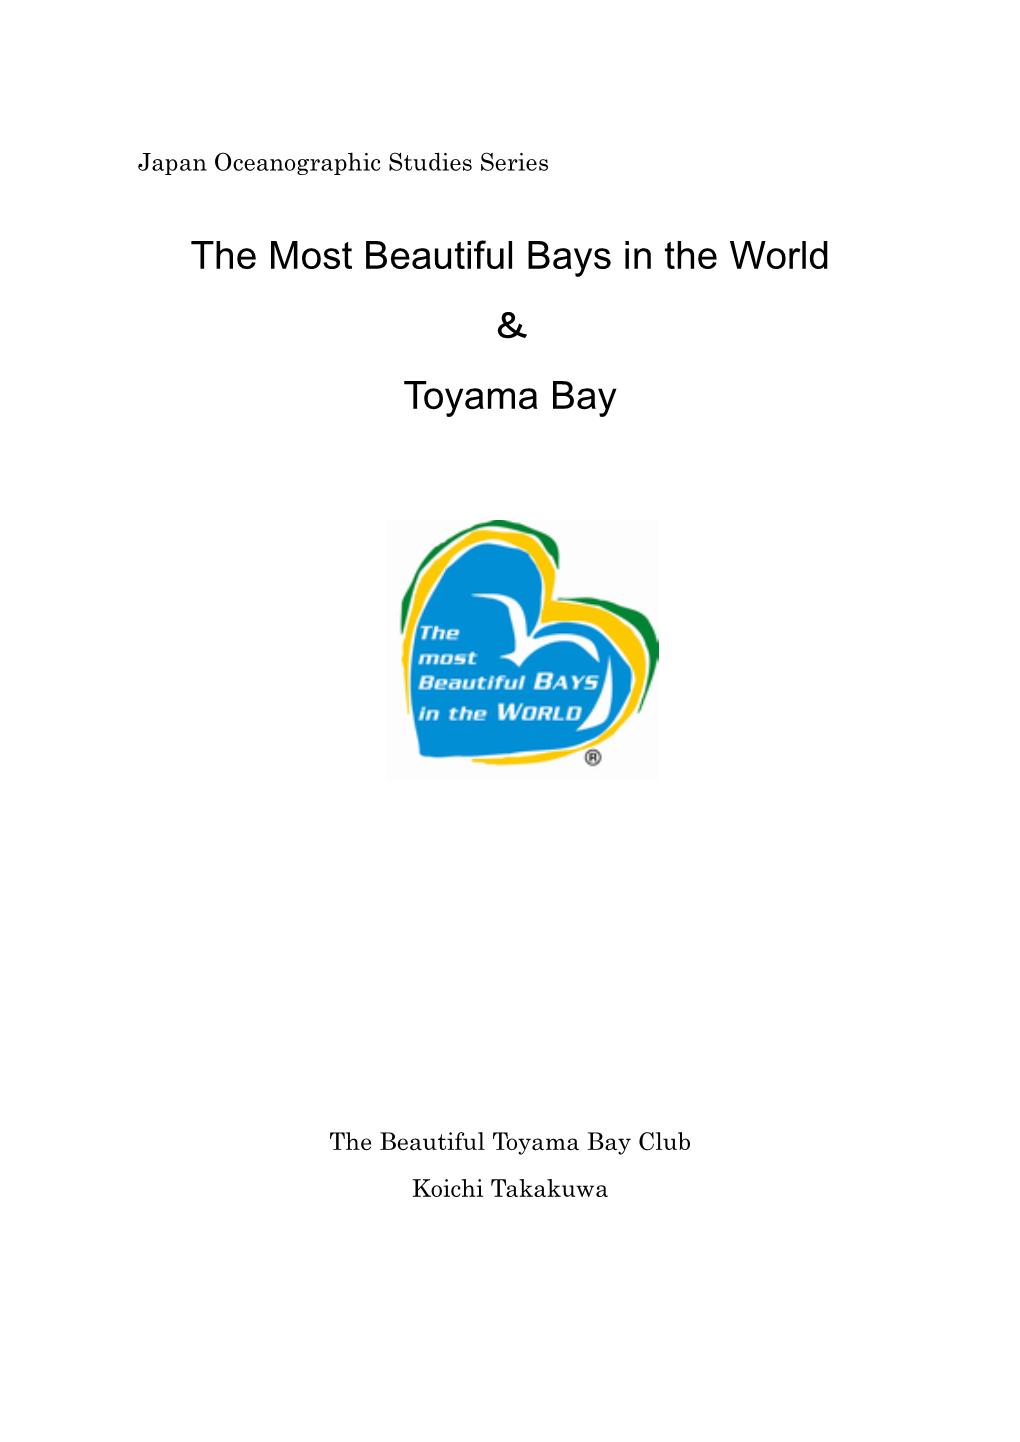 The Most Beautiful Bays in the World ＆ Toyama